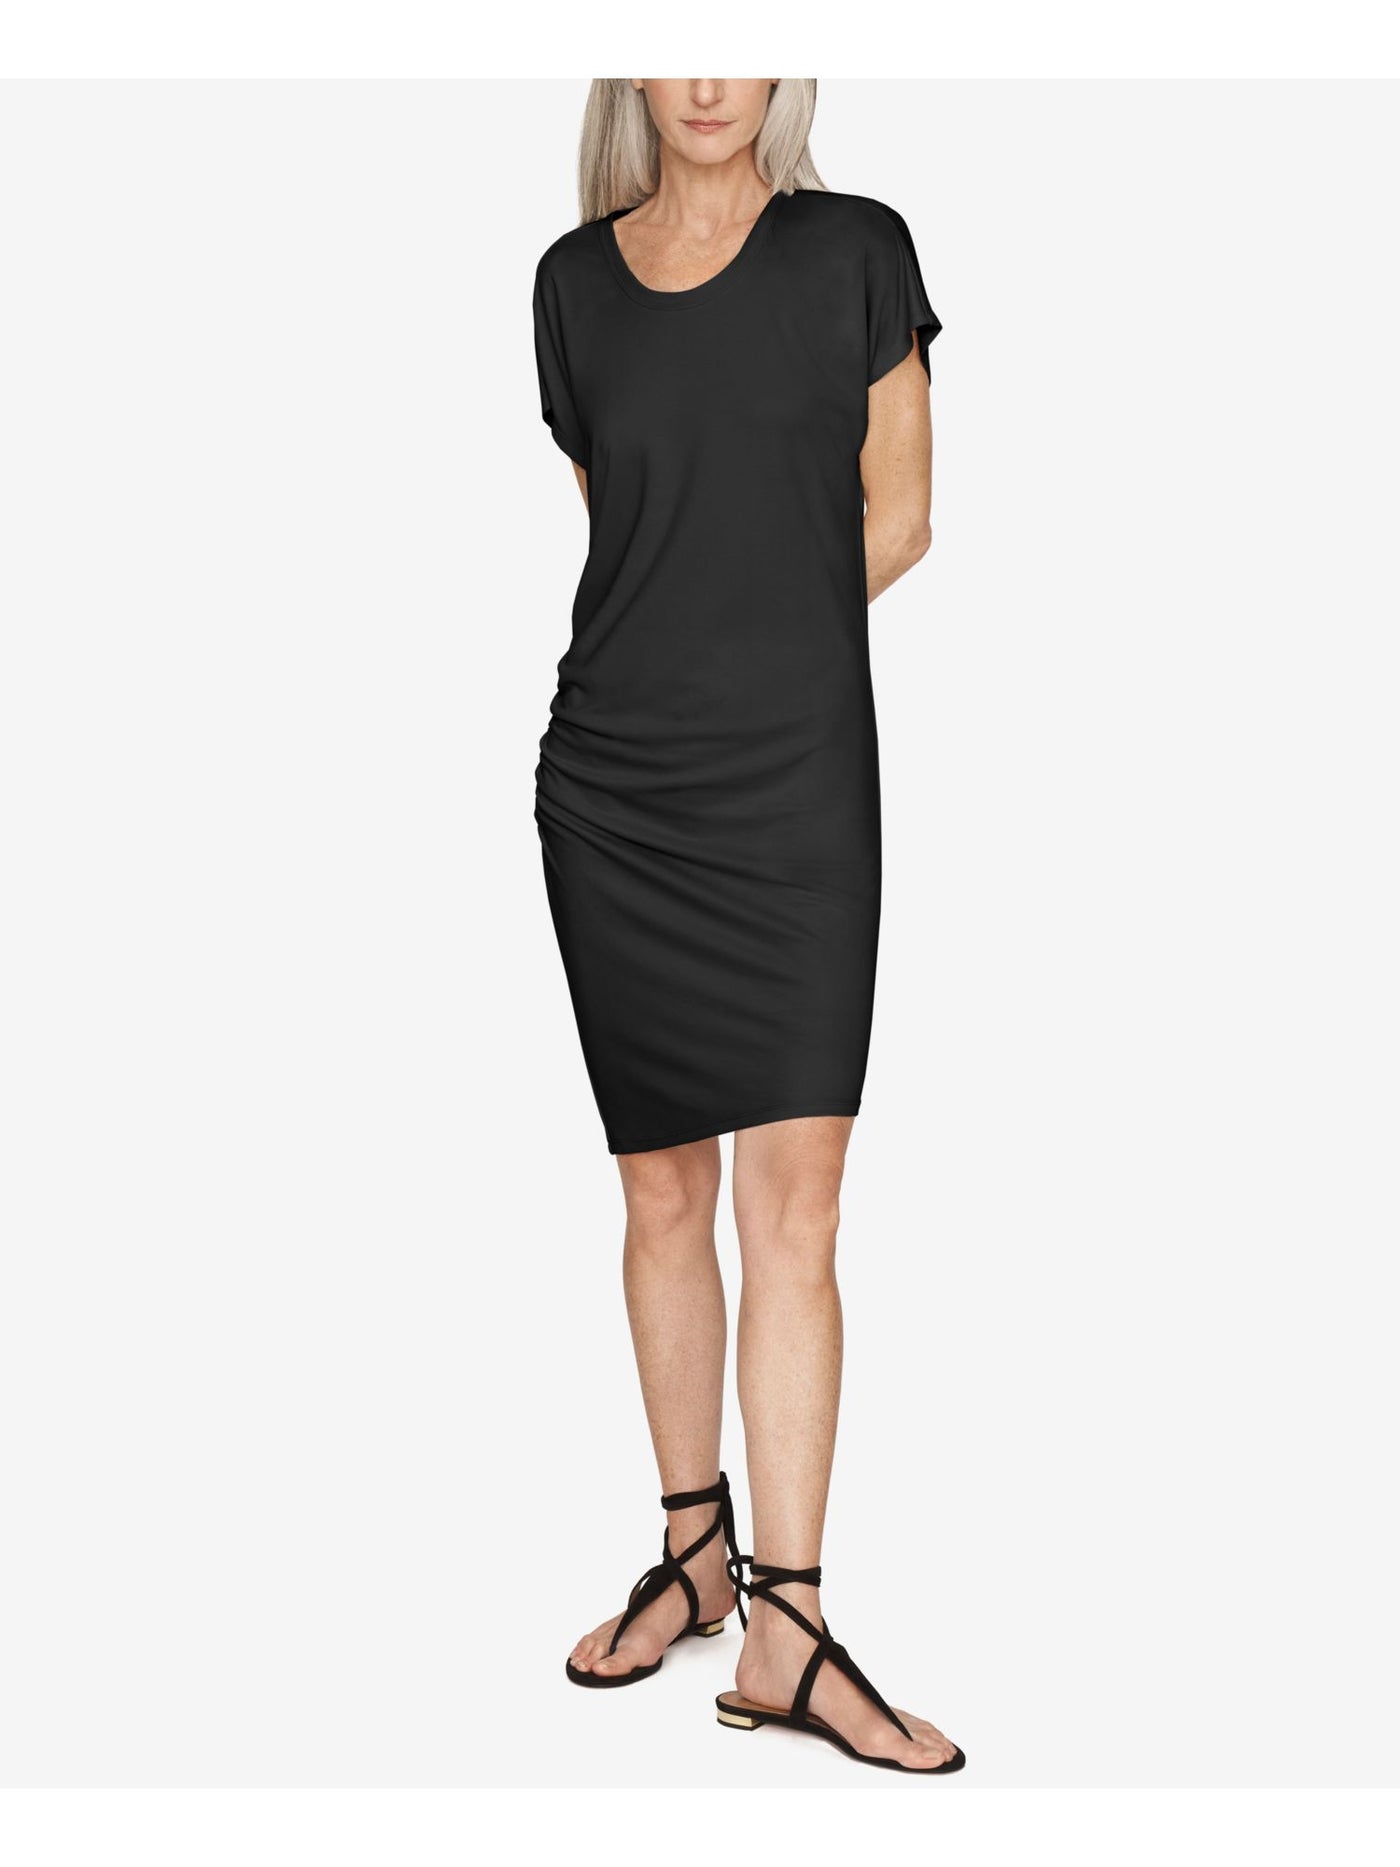 B NEW YORK Womens Black Stretch Ruched Short Sleeve Crew Neck Above The Knee Sheath Dress S